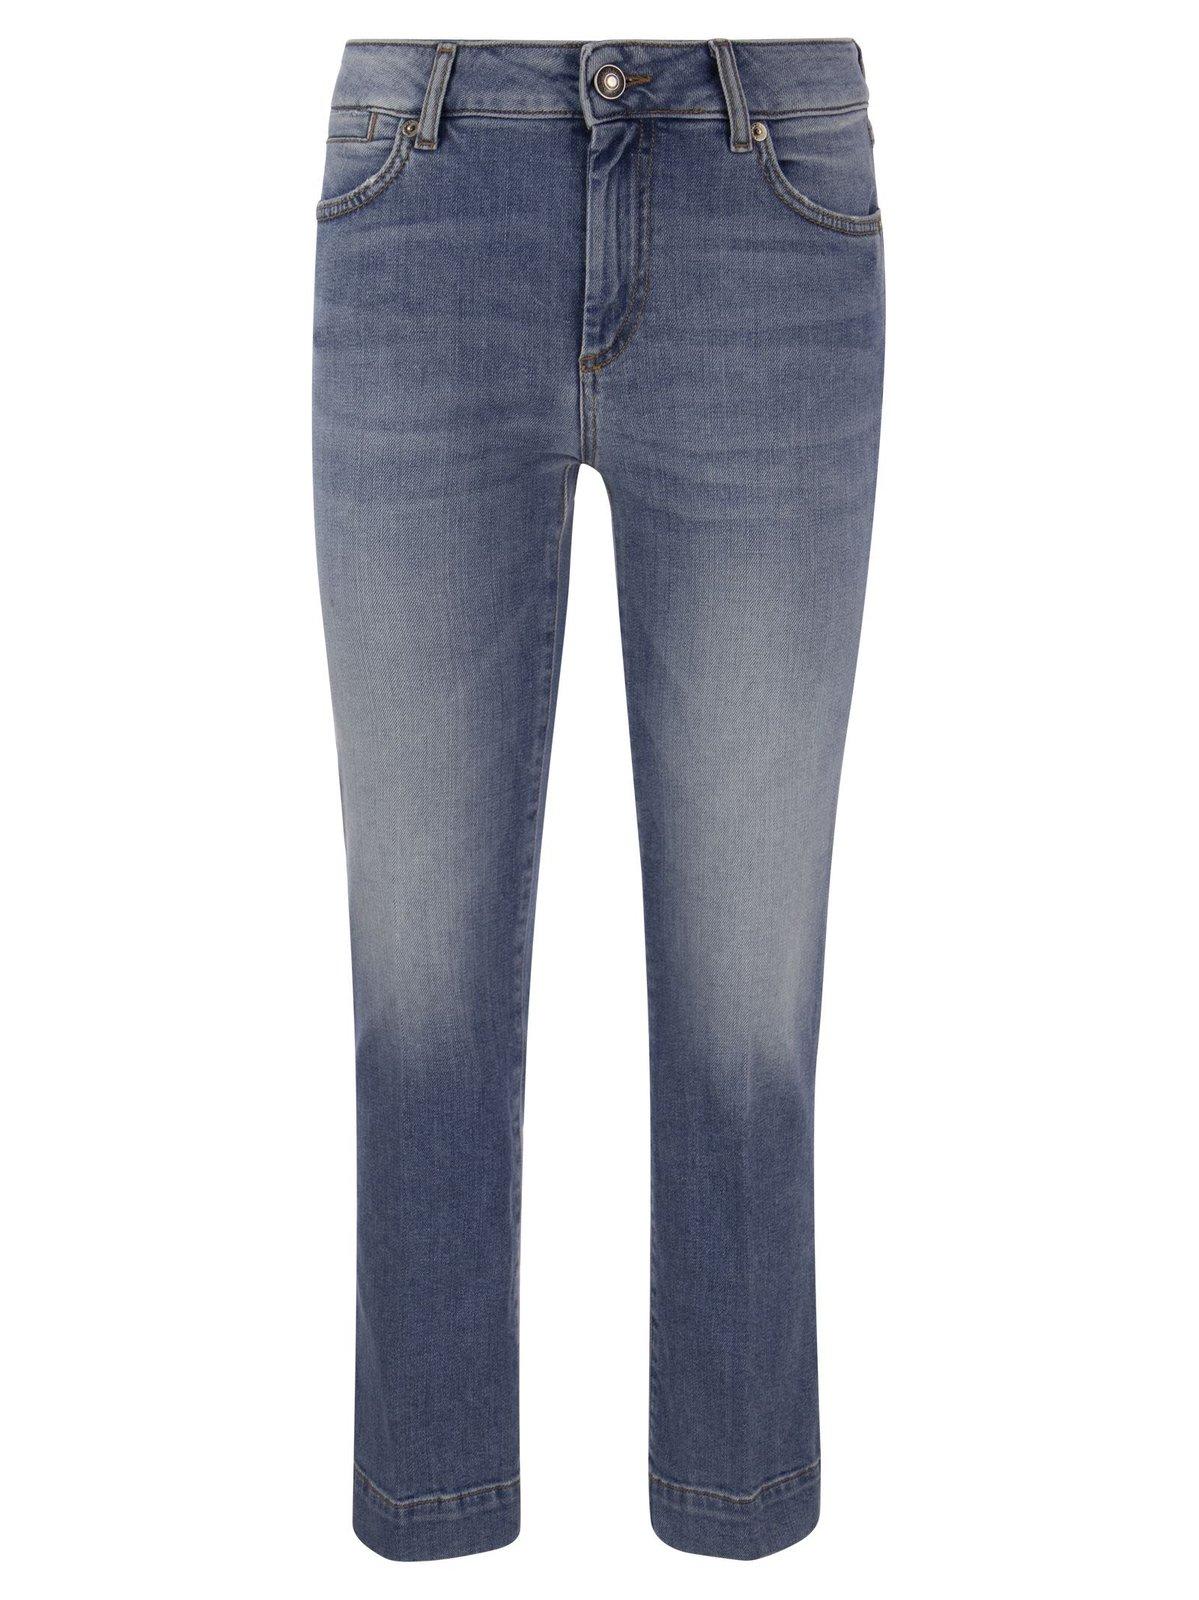 Blue Messico Jeans